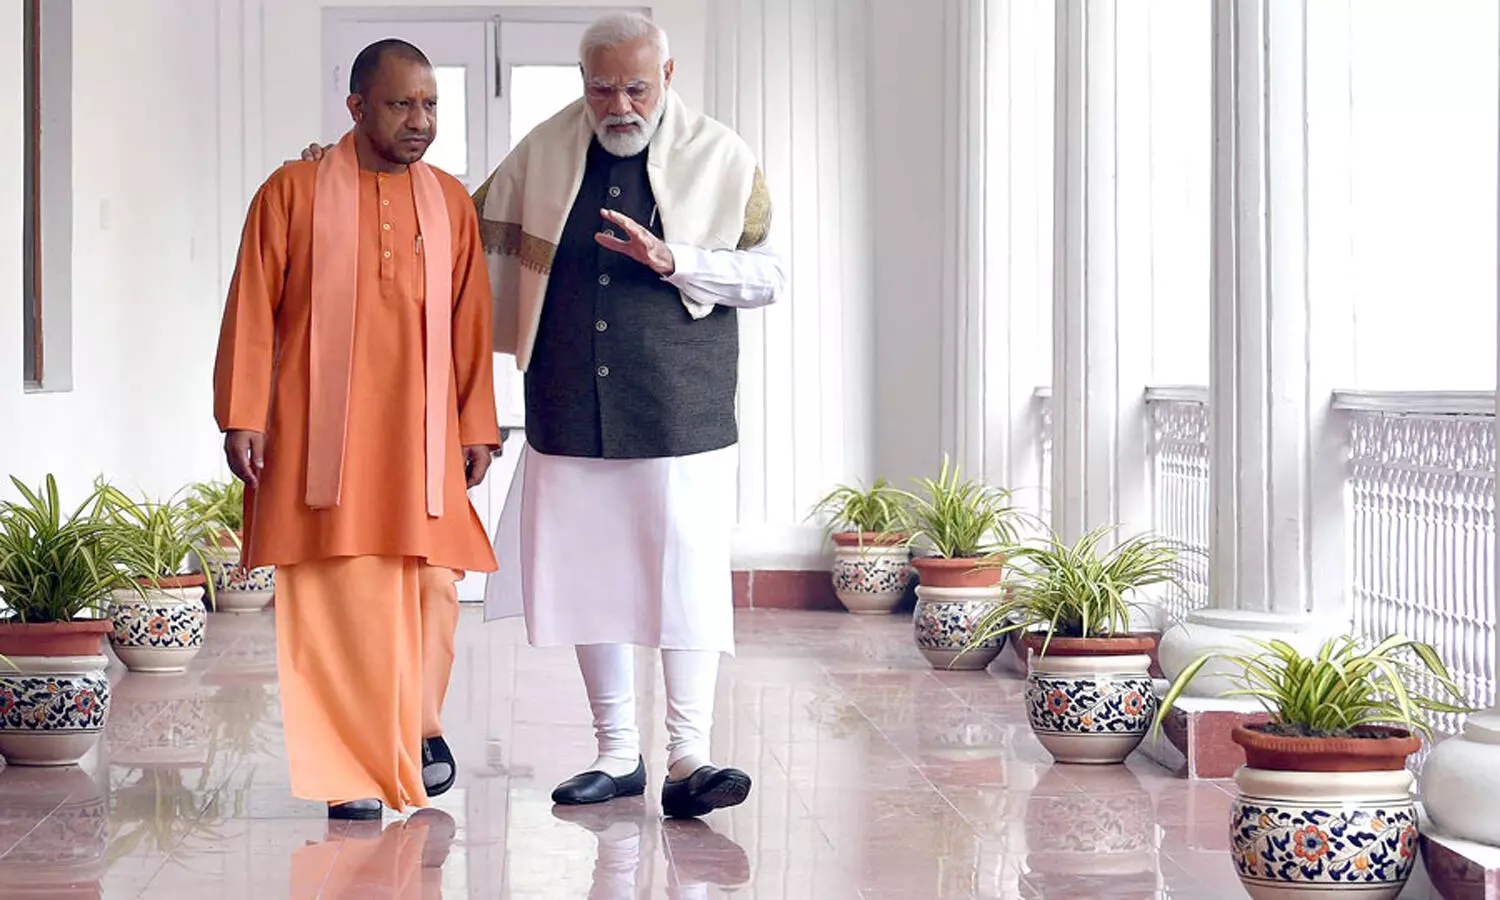 CM Yogi Adityanath shares pictures with PM Modi; Opposition says Tumse na ho payega